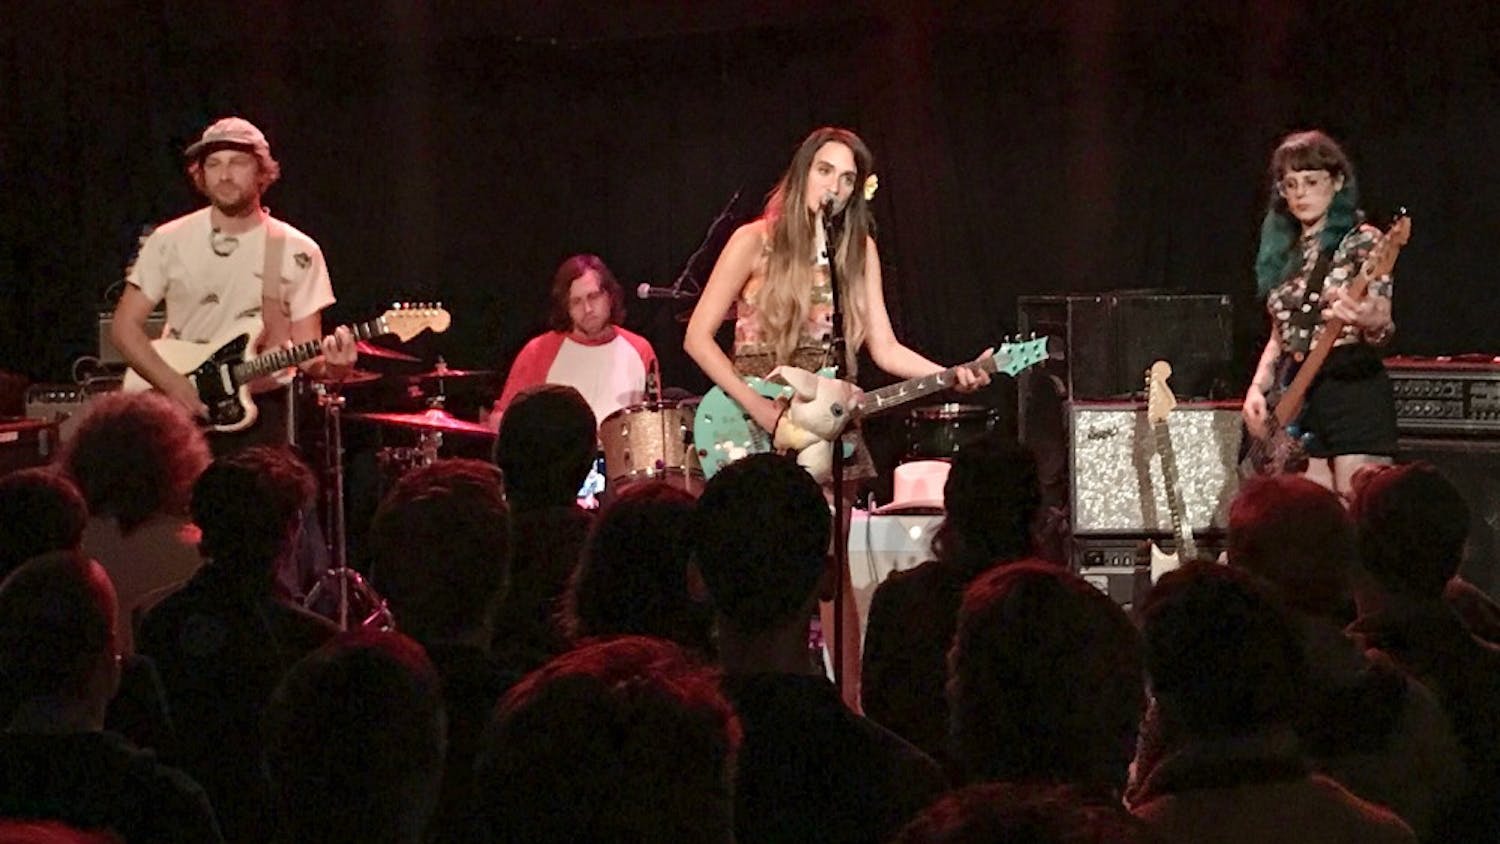 Speedy Ortiz performs gritty, indie rock to a subdued audience last Tuesday at High Noon Saloon.